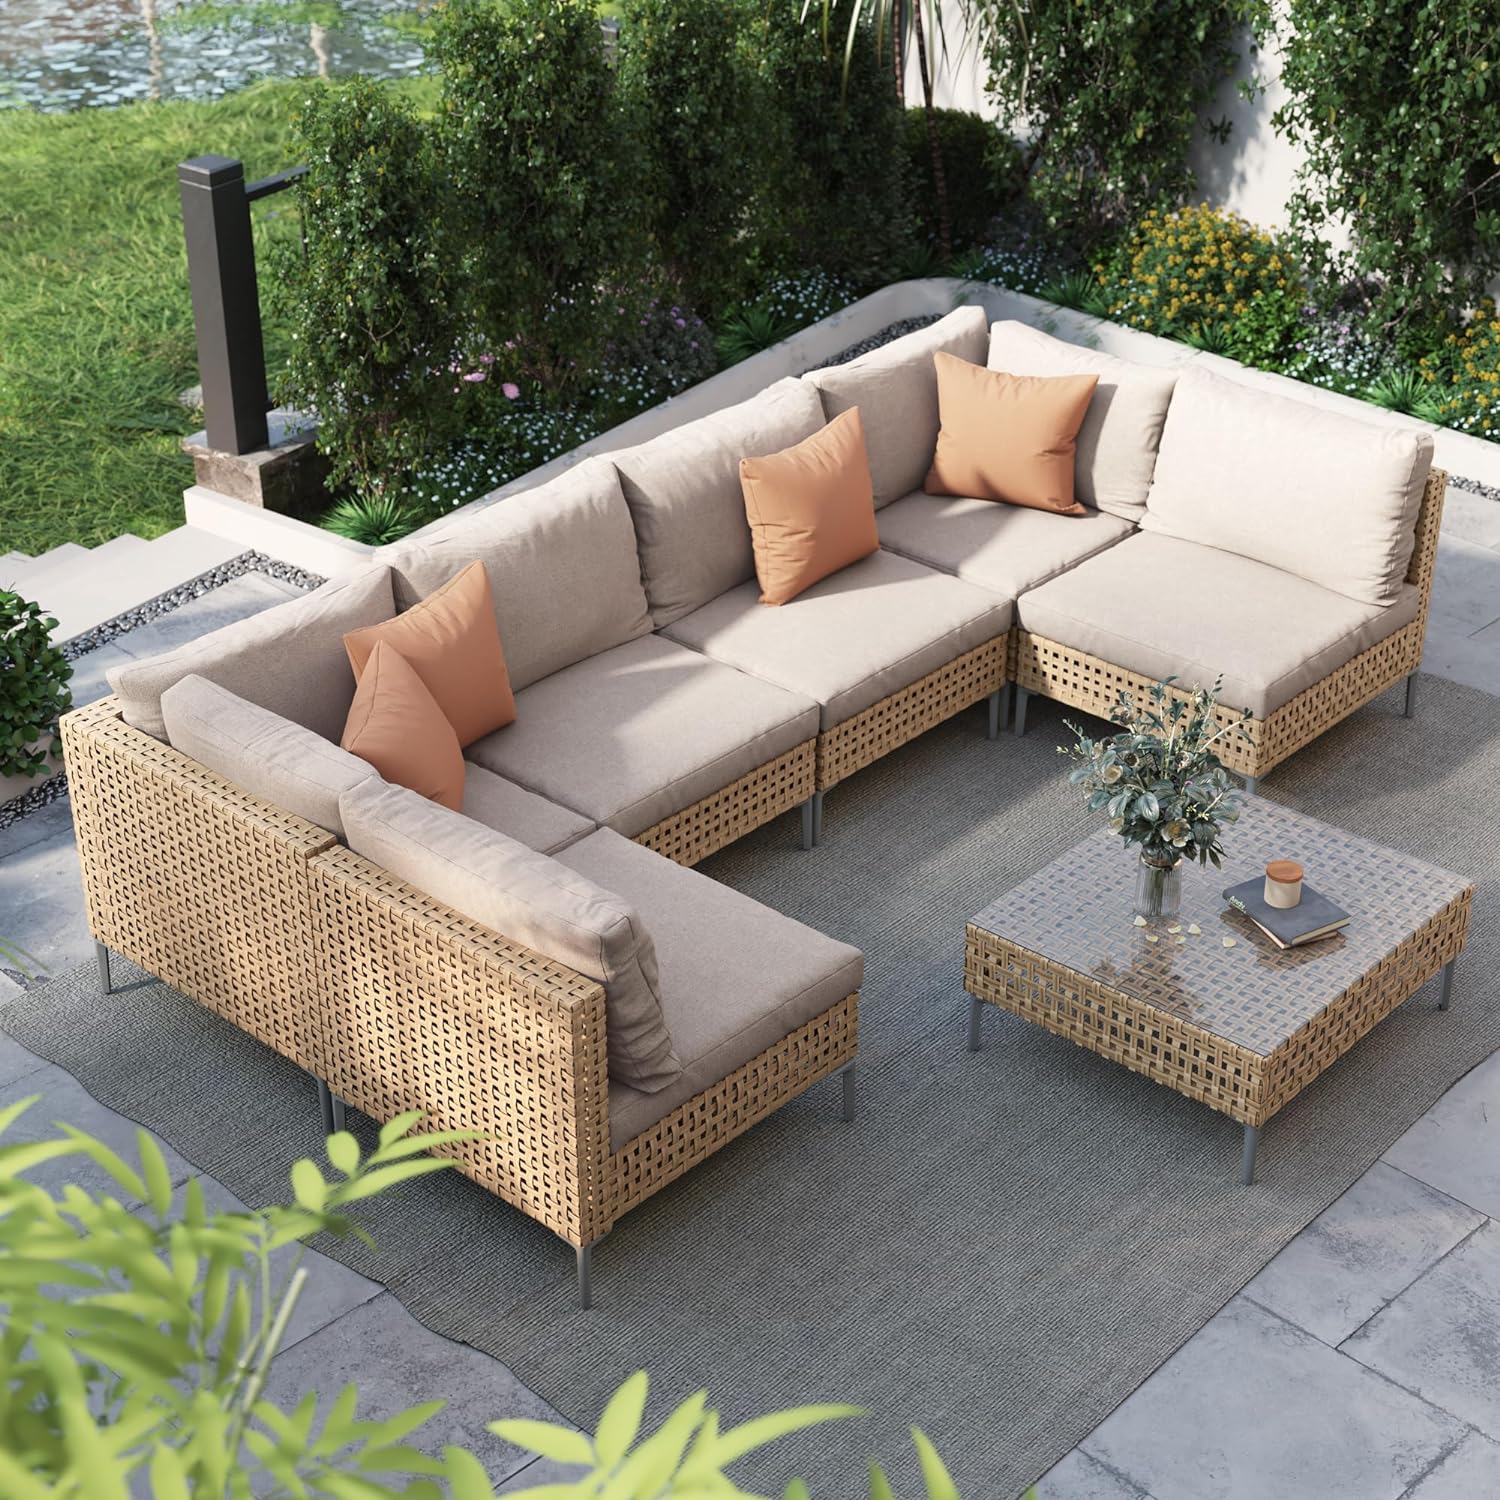 Grand patio 7-Piece Wicker Patio Furniture Set, All-Weather Outdoor Conversation Set Sectional Sofa with Water Resistant Beige Thick Cushions and Coffee Table